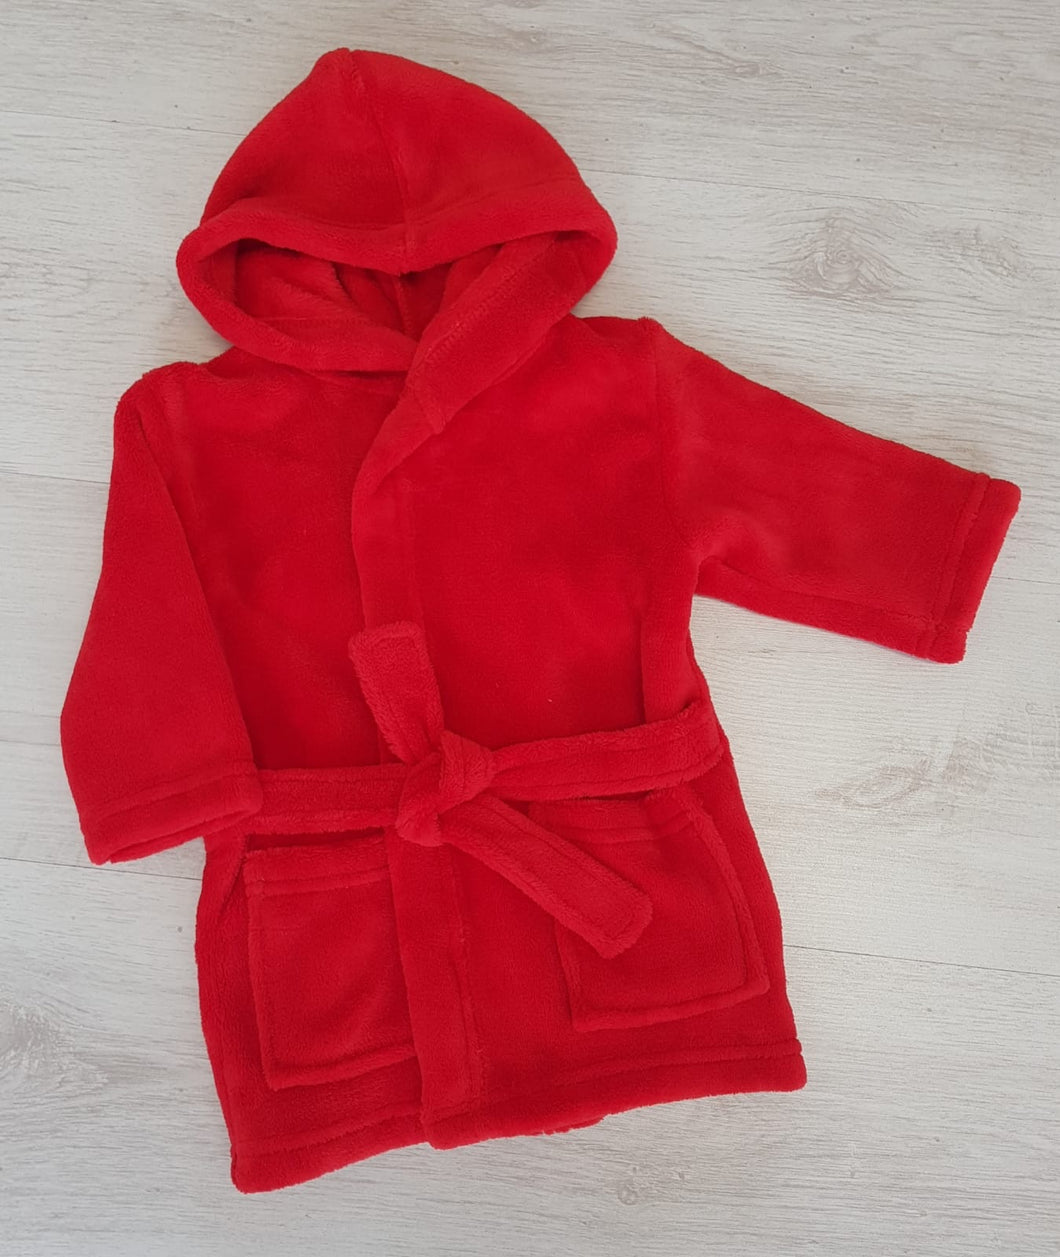 Soft fleece red dressing gown